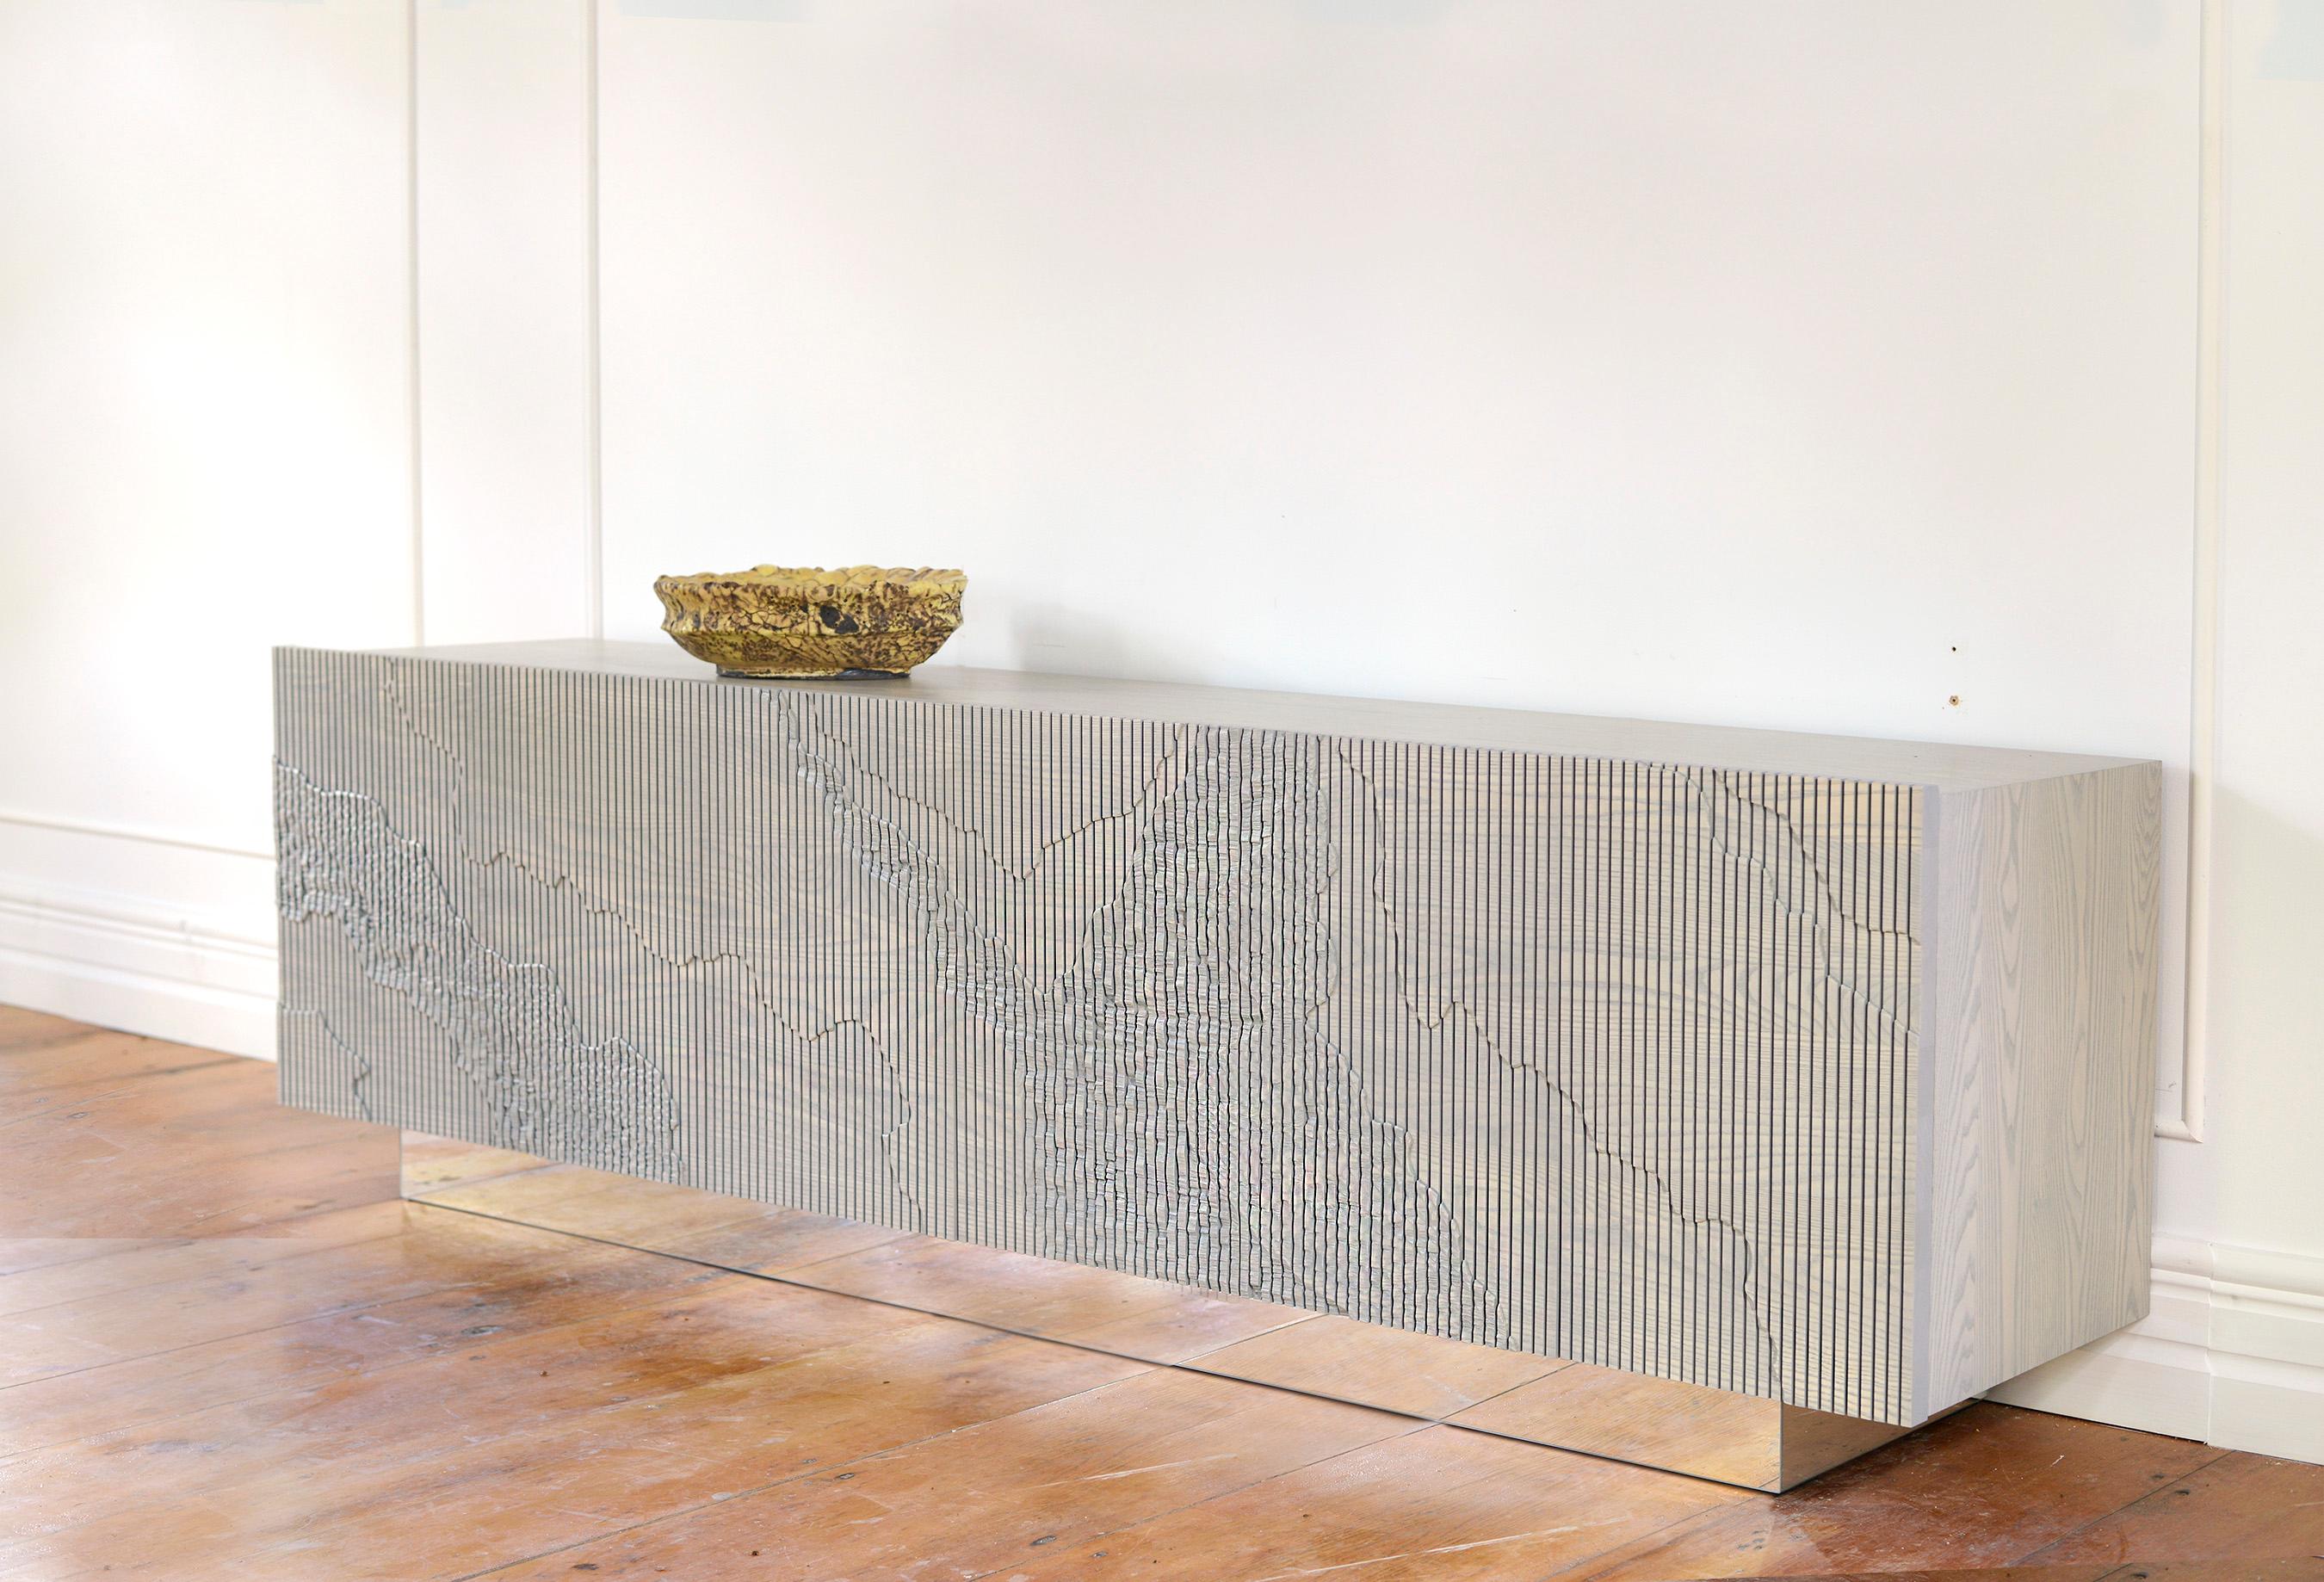 Both monumental and subtle, the Shale Credenza brings the intricacies of nature’s geology indoors. The wood doors are scored vertically across the grain, and details of a cliff’s facade, mapped out by Simon Johns, are carved into them by hand